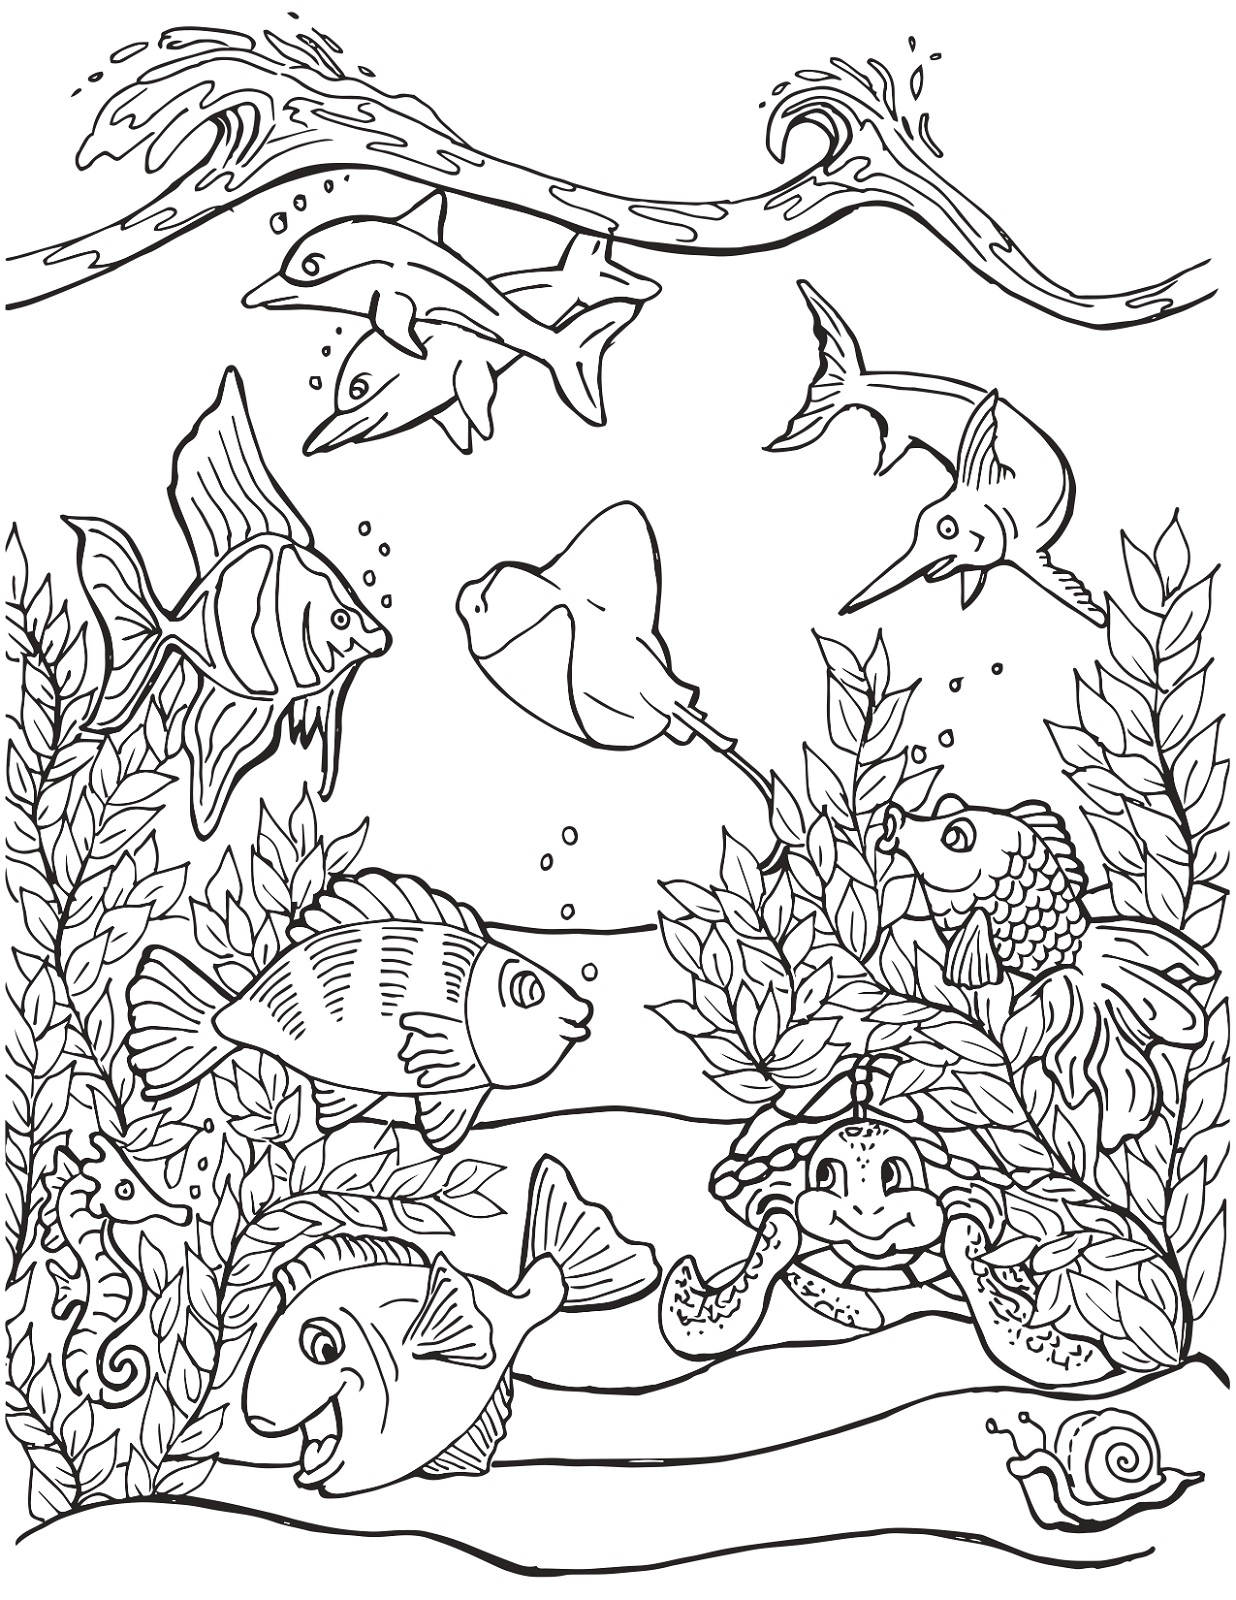 Sea Life Coloring Pages Images